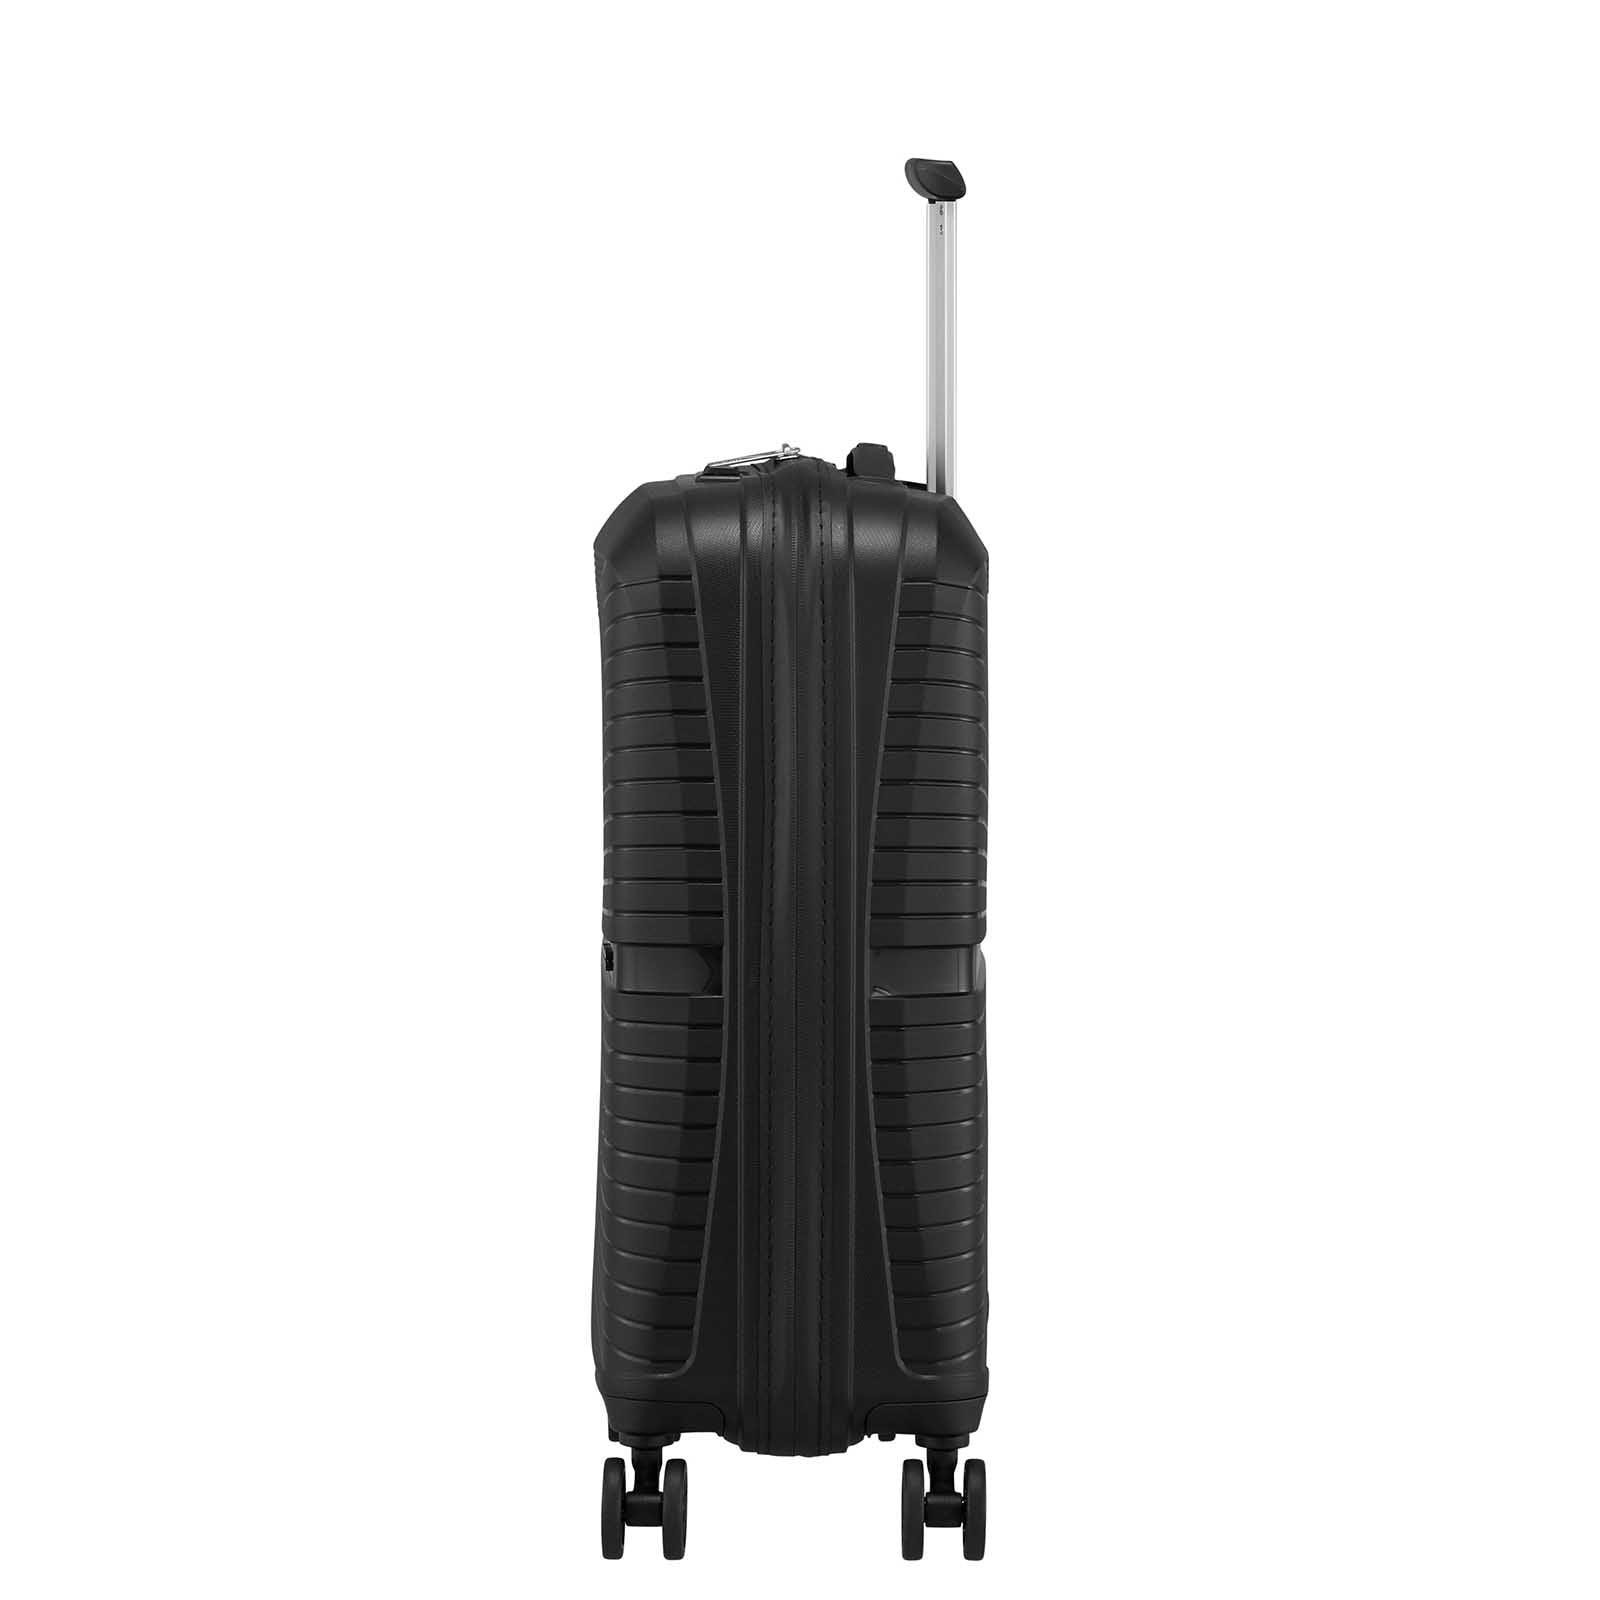 American-Tourister-Airconic-55cm-Carry-On-Suitcase-Onyx-Black-Side-RH